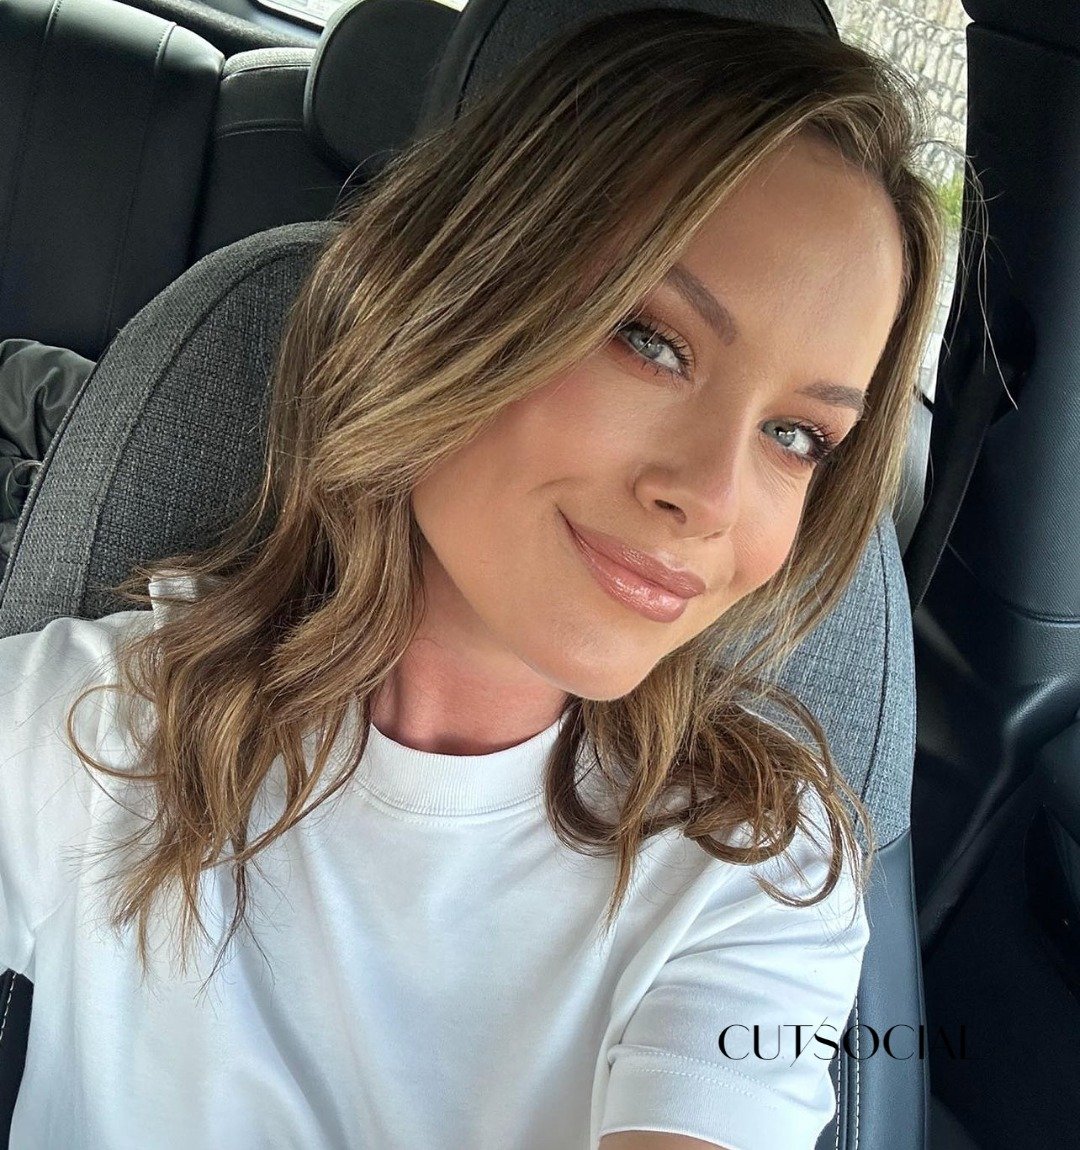 Would ya just look at the GORGEOUS @michelemcgrath 😍

Slowly but surely getting lighter while keeping her stunning healthy as healthy as can be 🥰 We looove a client selfie 🤳

 #cutsocial #dublinhairdresser #hairgoals #dublinhairstylist #behindthec